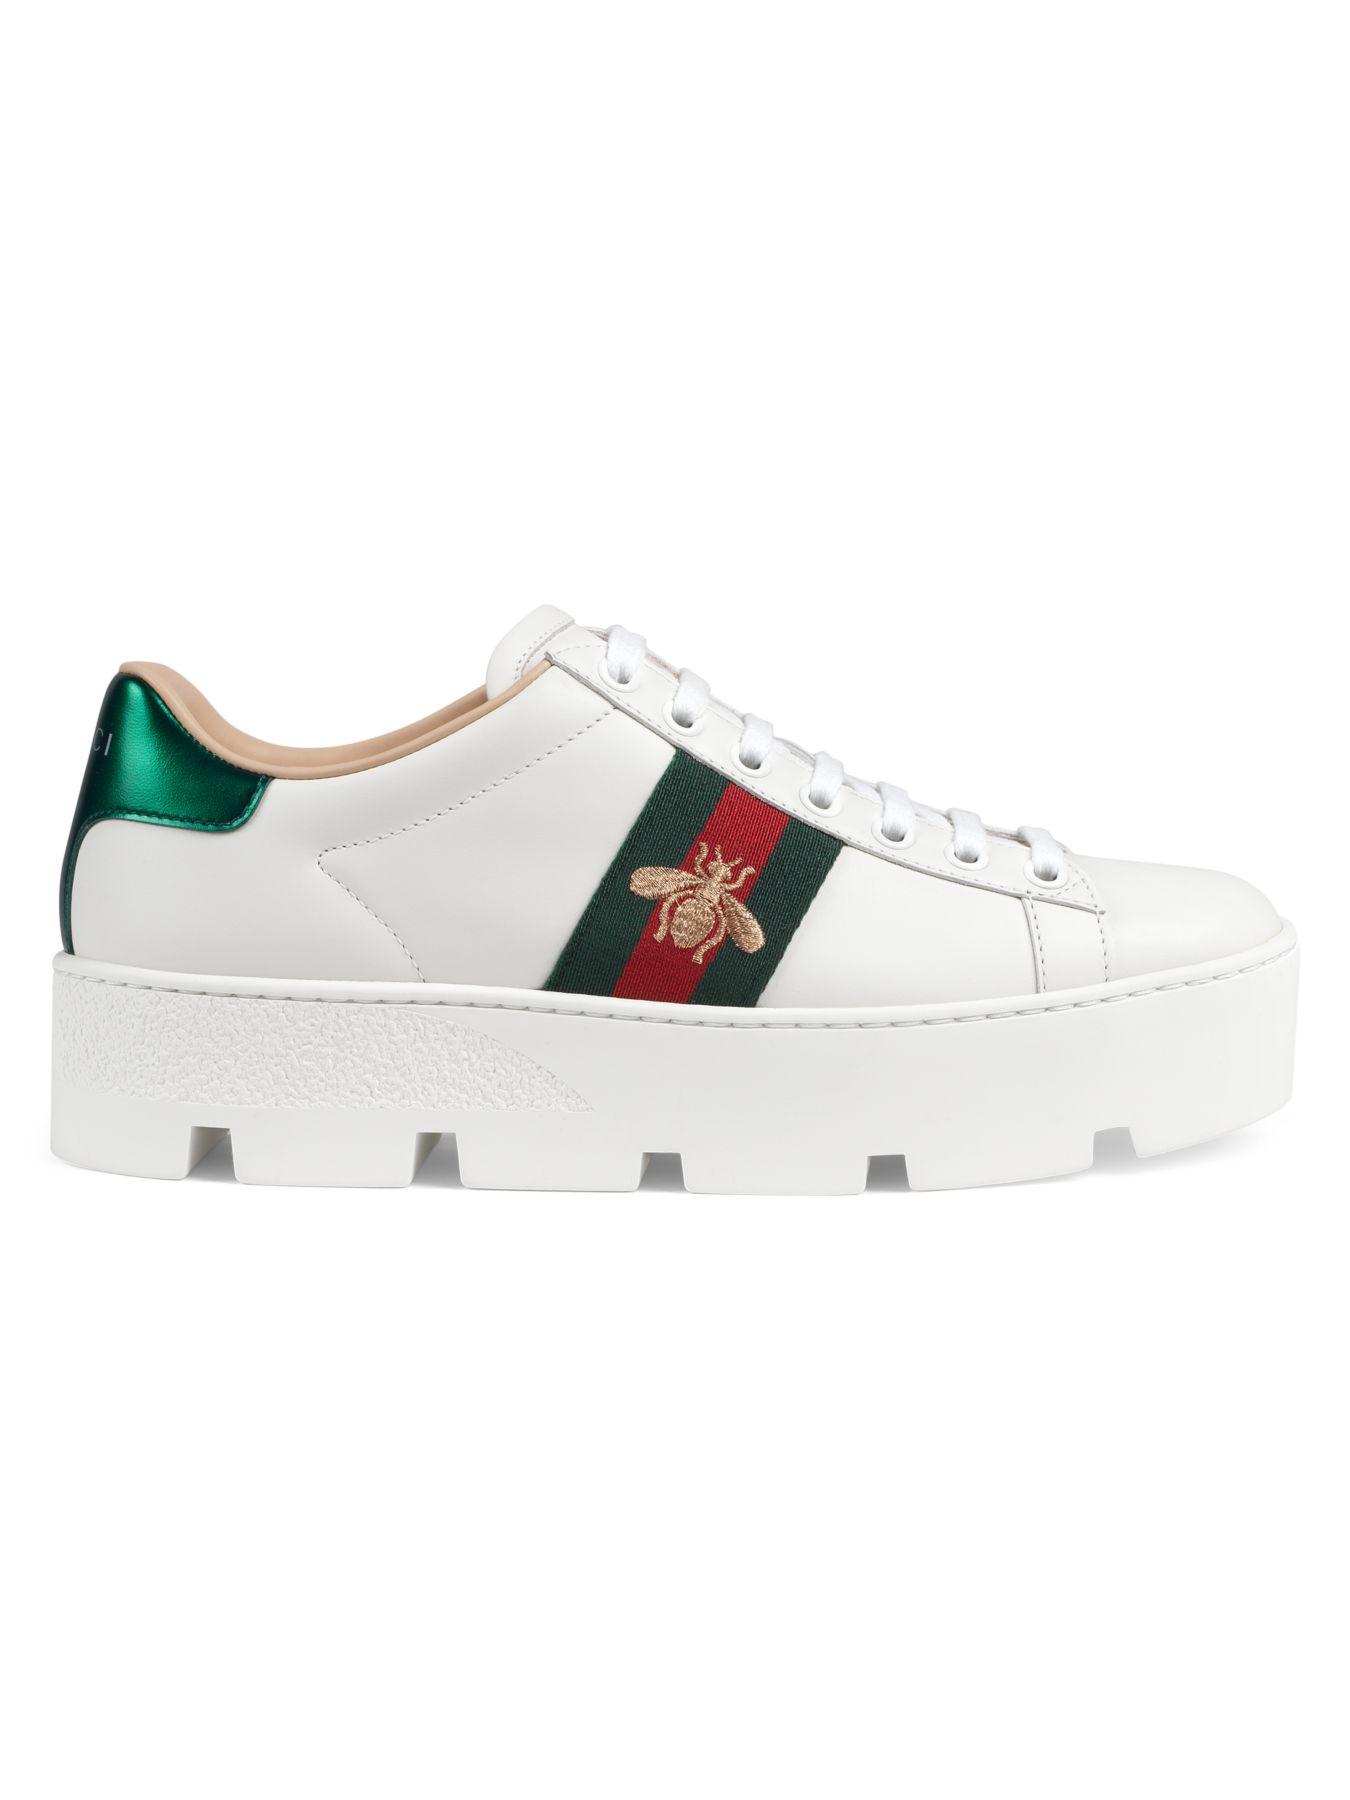 Gucci Leather New Ace Platform Bee Sneakers in White - Lyst